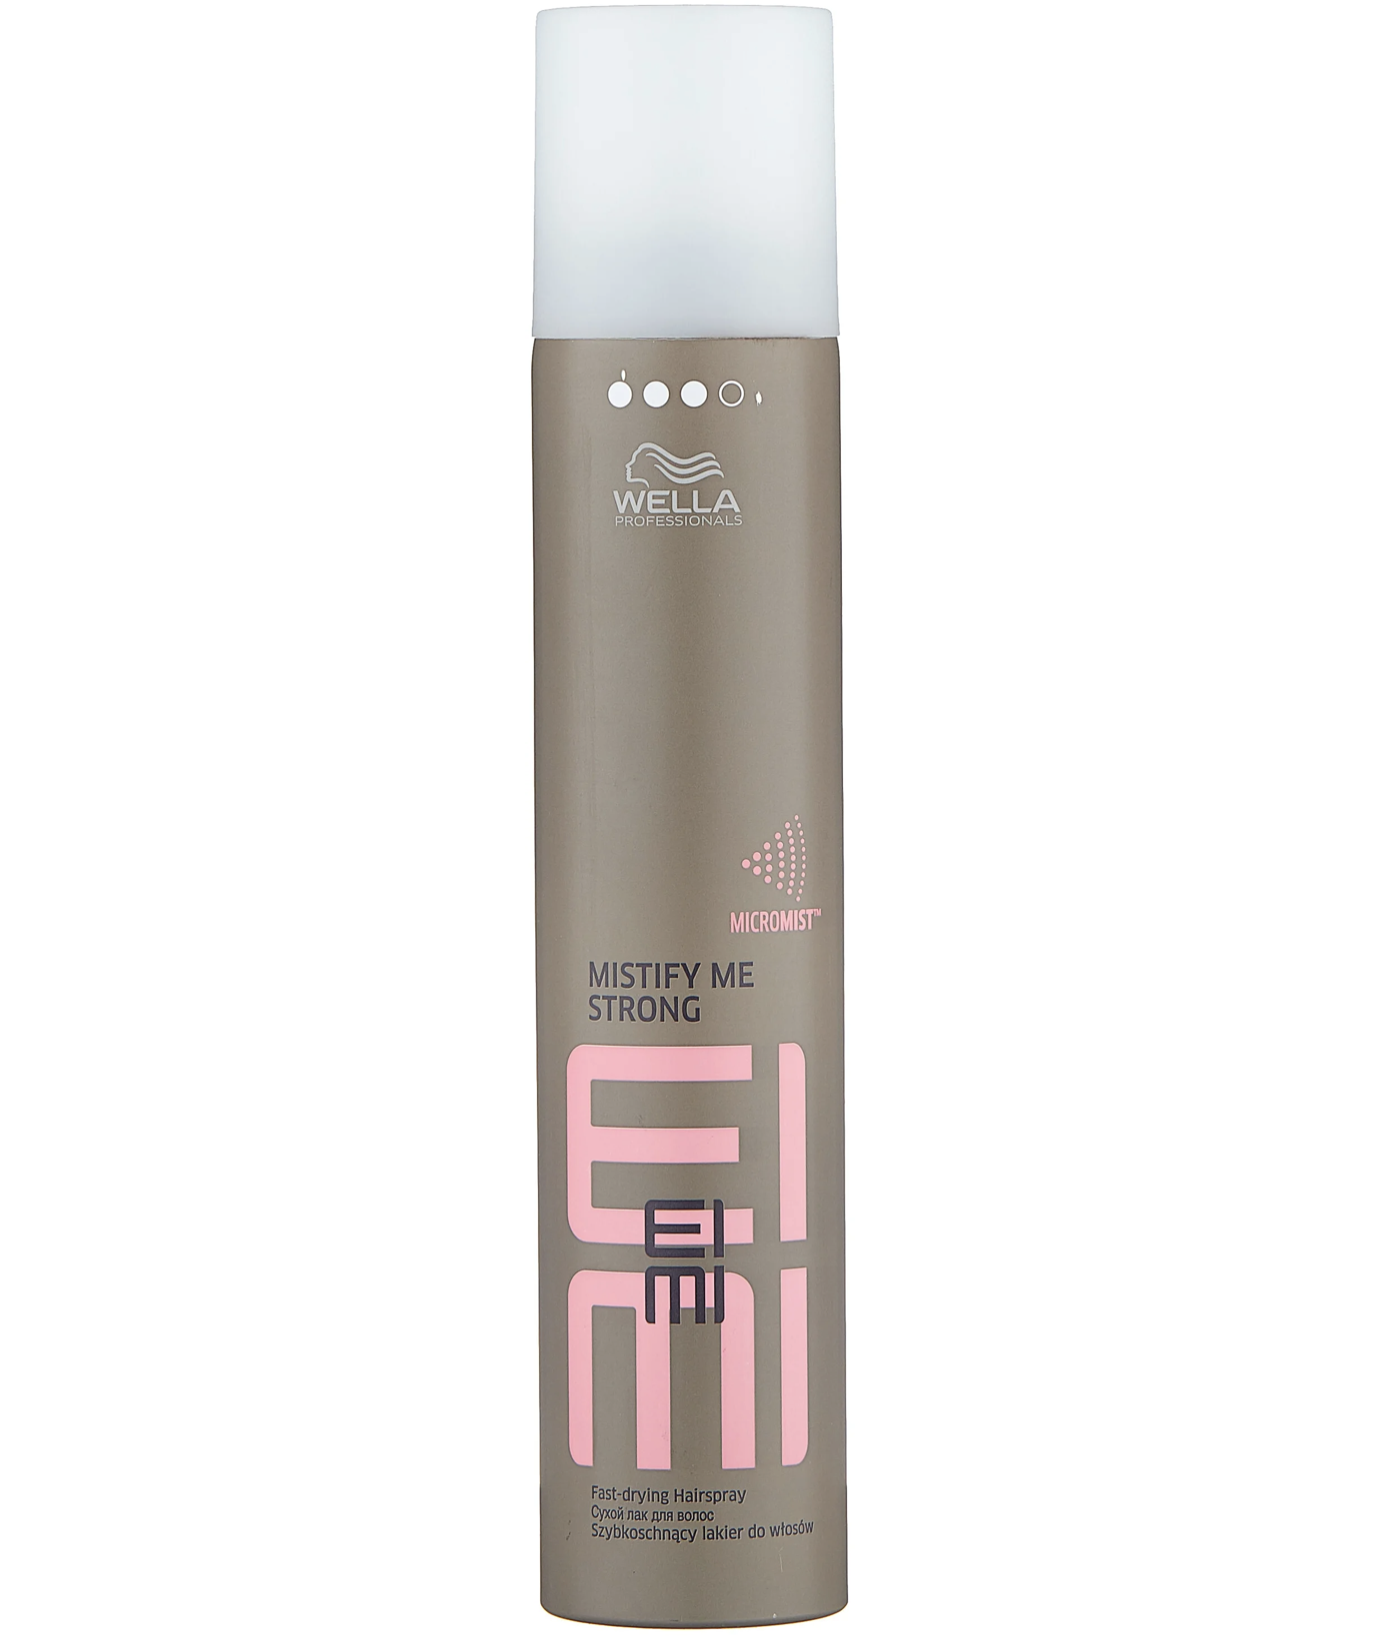   / Wella Professionals -     Eimi Mistify Me Strong   300 